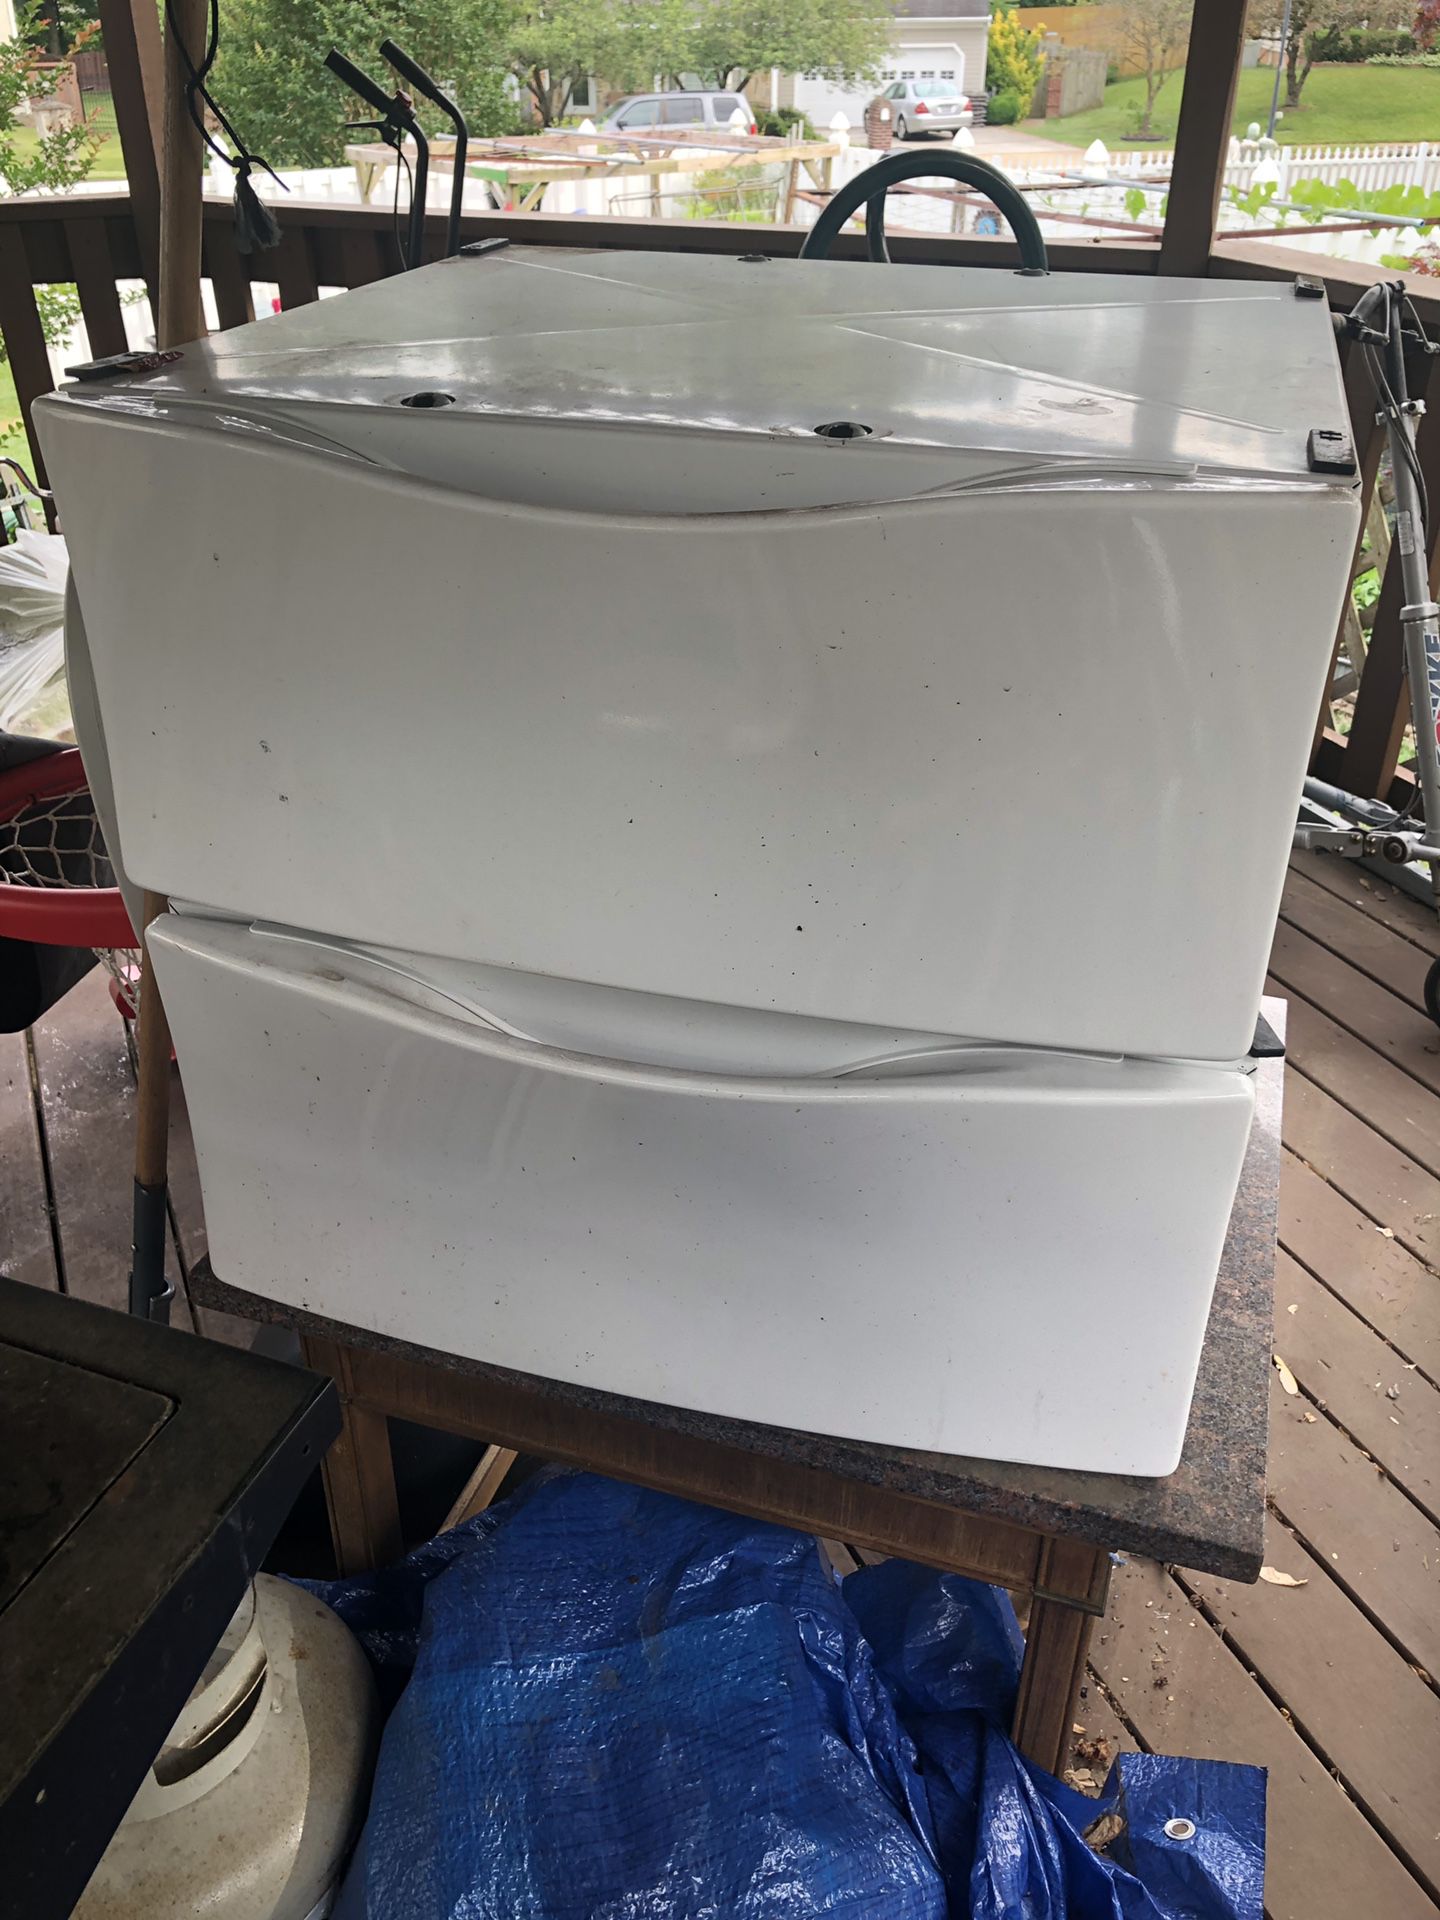 Whirlpool washer dryer shelving stand. FREE COME PICK UP